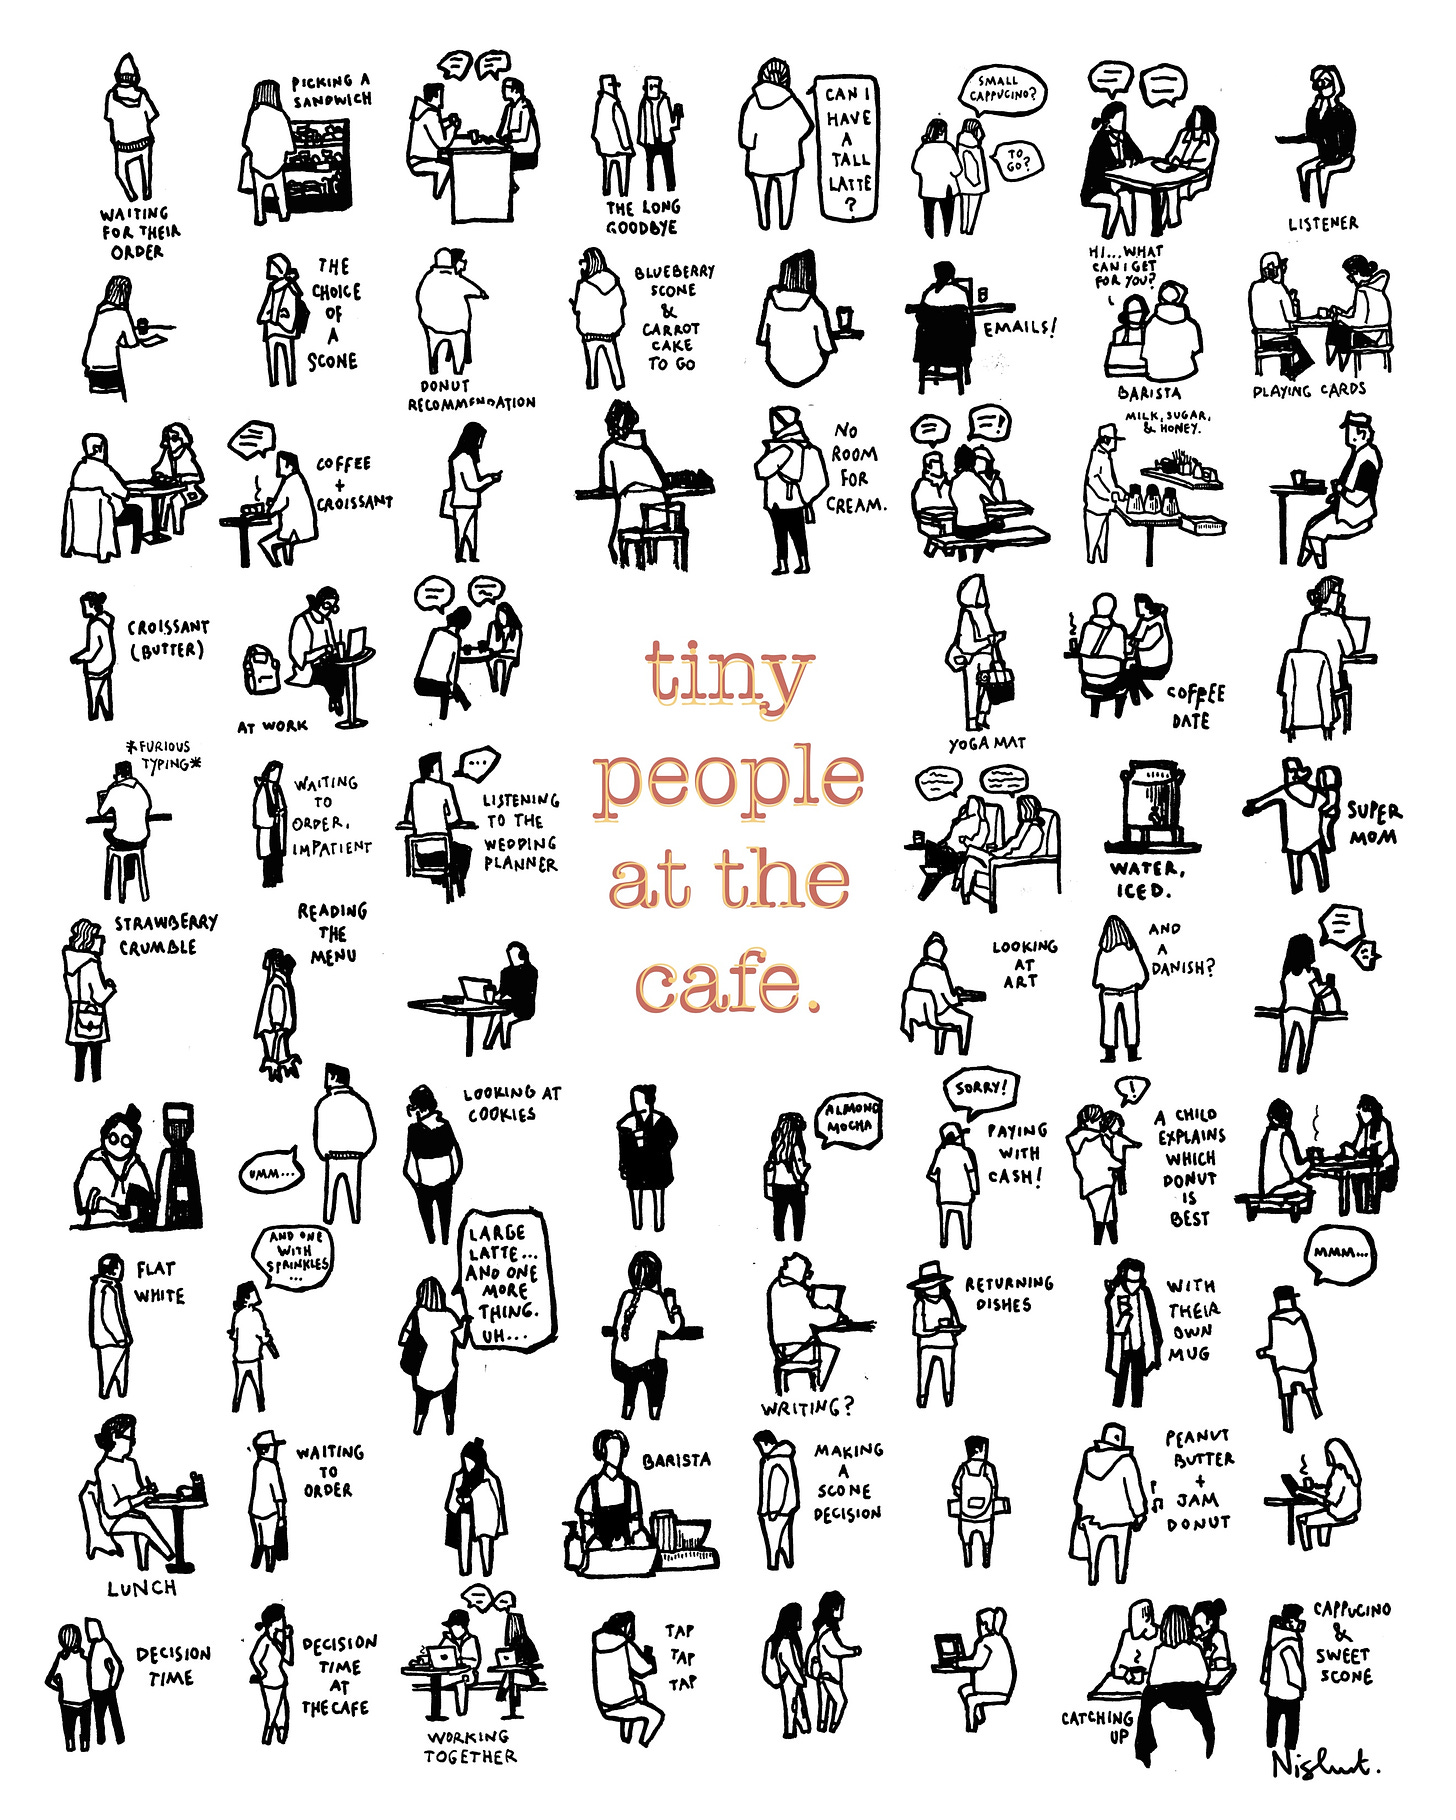 A poster of tiny people at the cafe

Description automatically generated